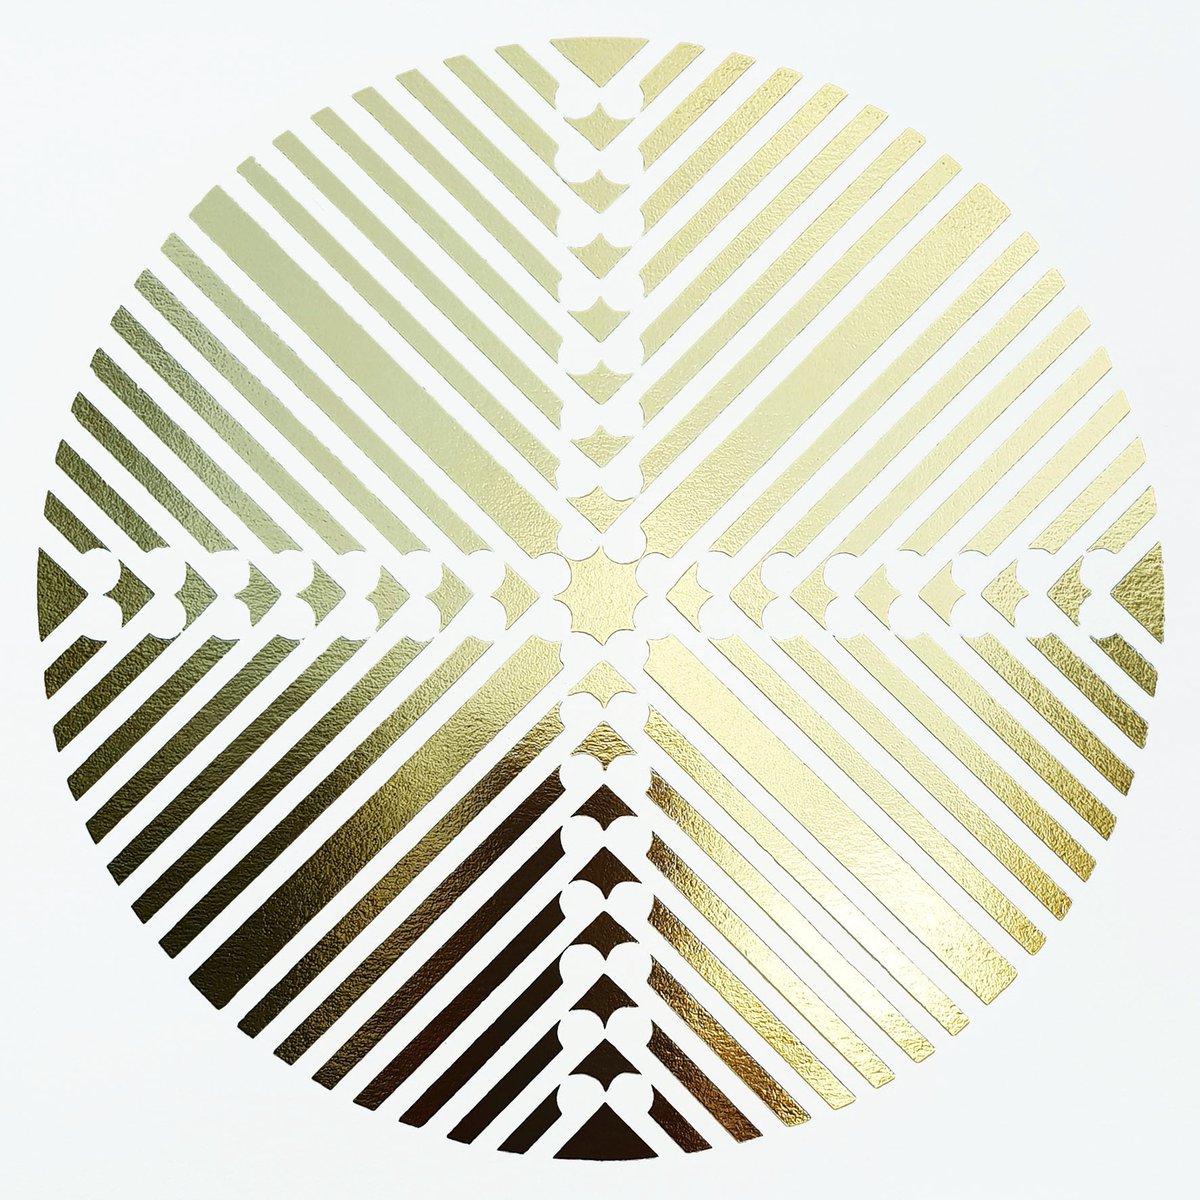 Image of 'Take Flight' Limited Edition Gold foil Print